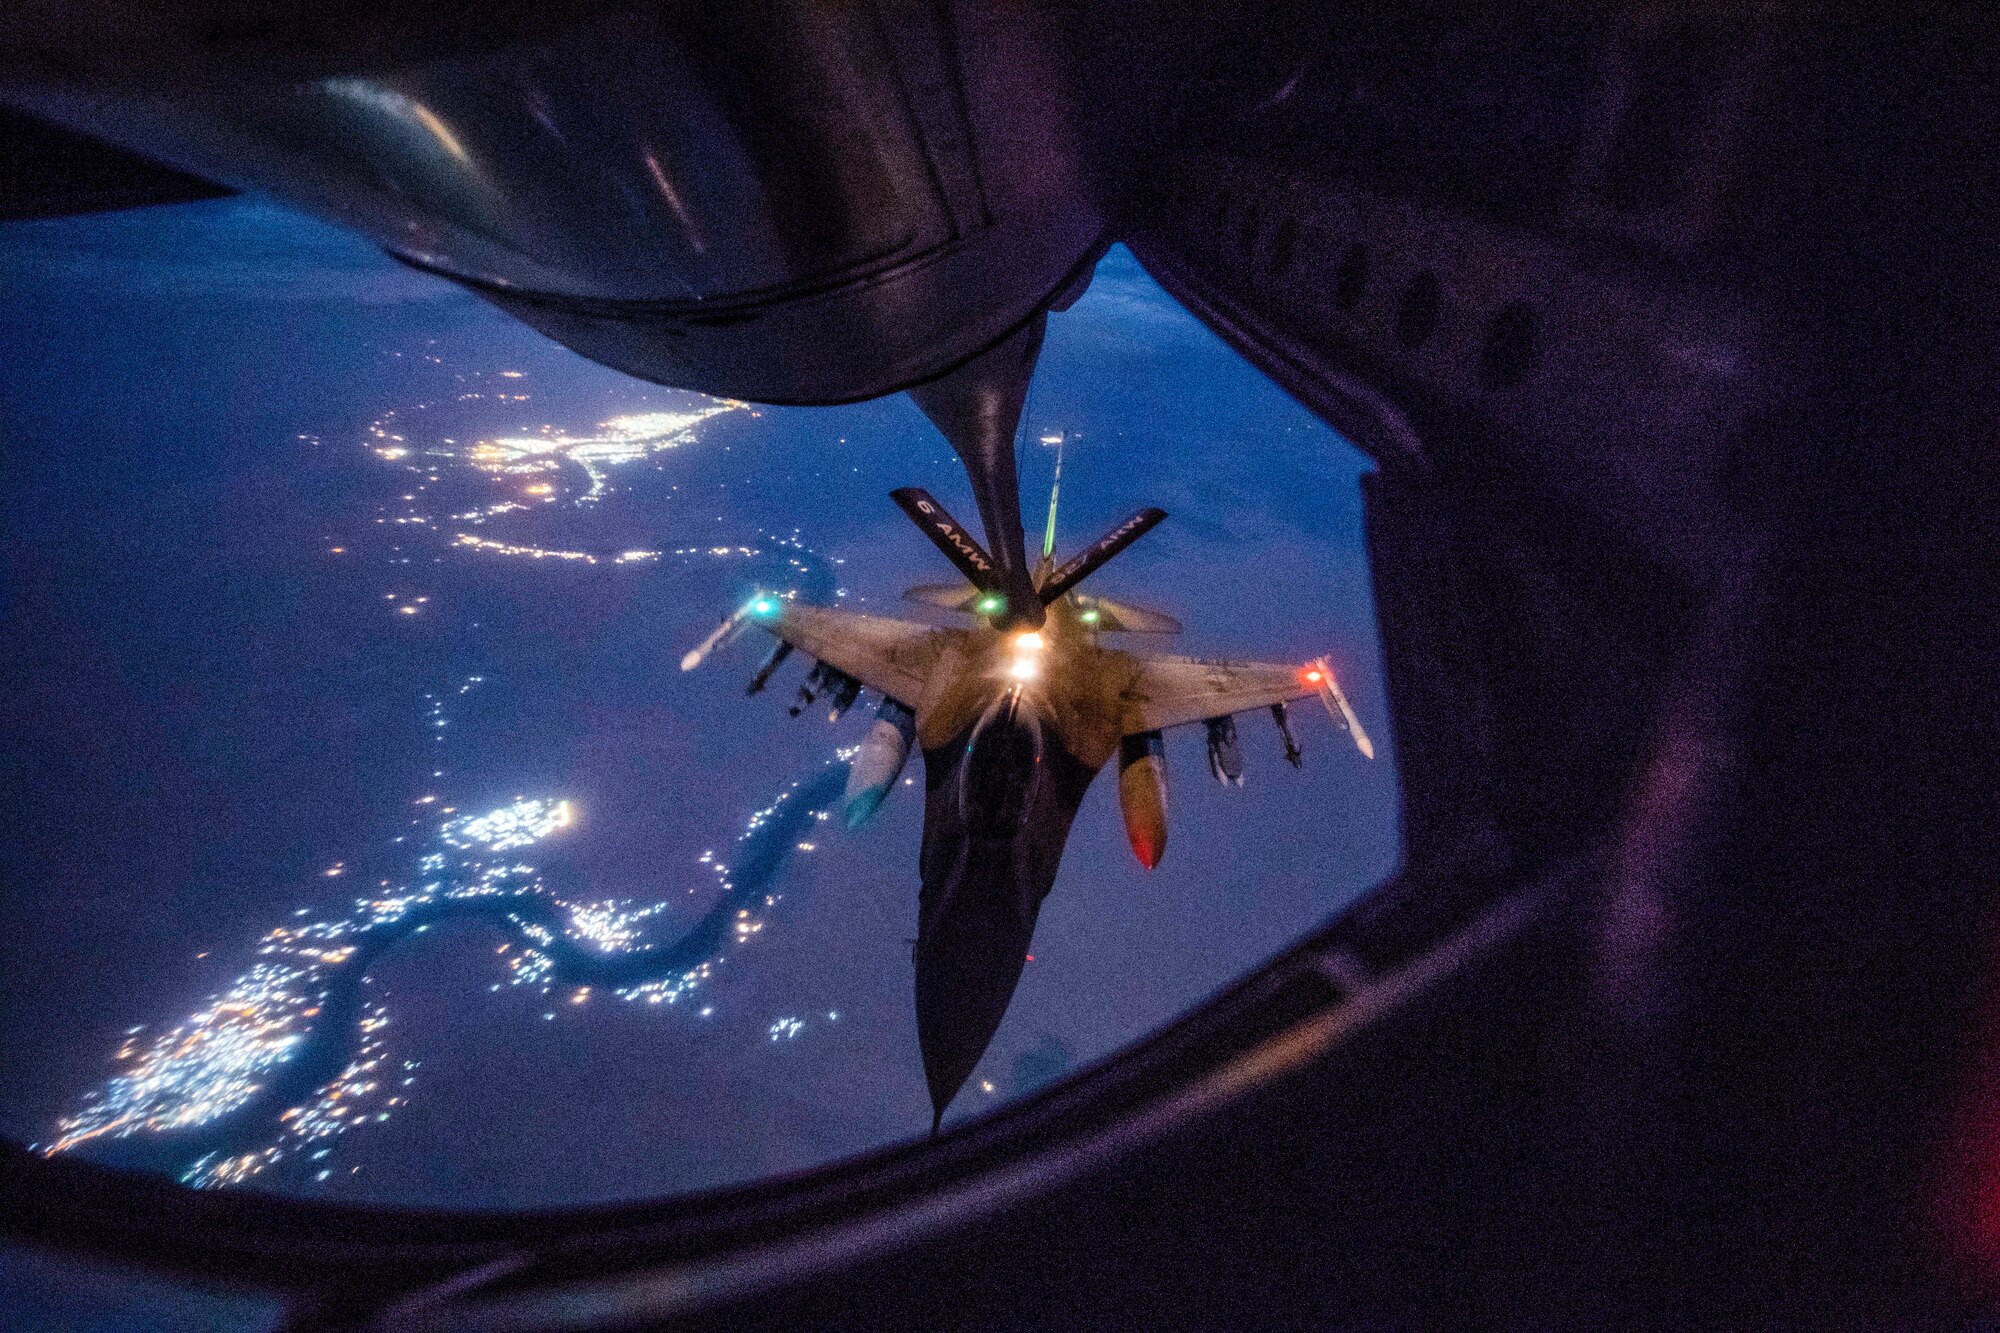 An Air Force F-16 Fighting Falcon, assigned to the 157th Expeditionary Fighter Squadron, receives in-flight fuel from a KC-135 Stratotanker during a mission in support of Operation Inherent Resolve over Iraq, Sept. 21, 2018. U.S. and Coalition aircraft provide unmatched combat capability in support of U.S. Central Command military objectives. (U.S. Air Force photo by Staff Sgt. Keith James)